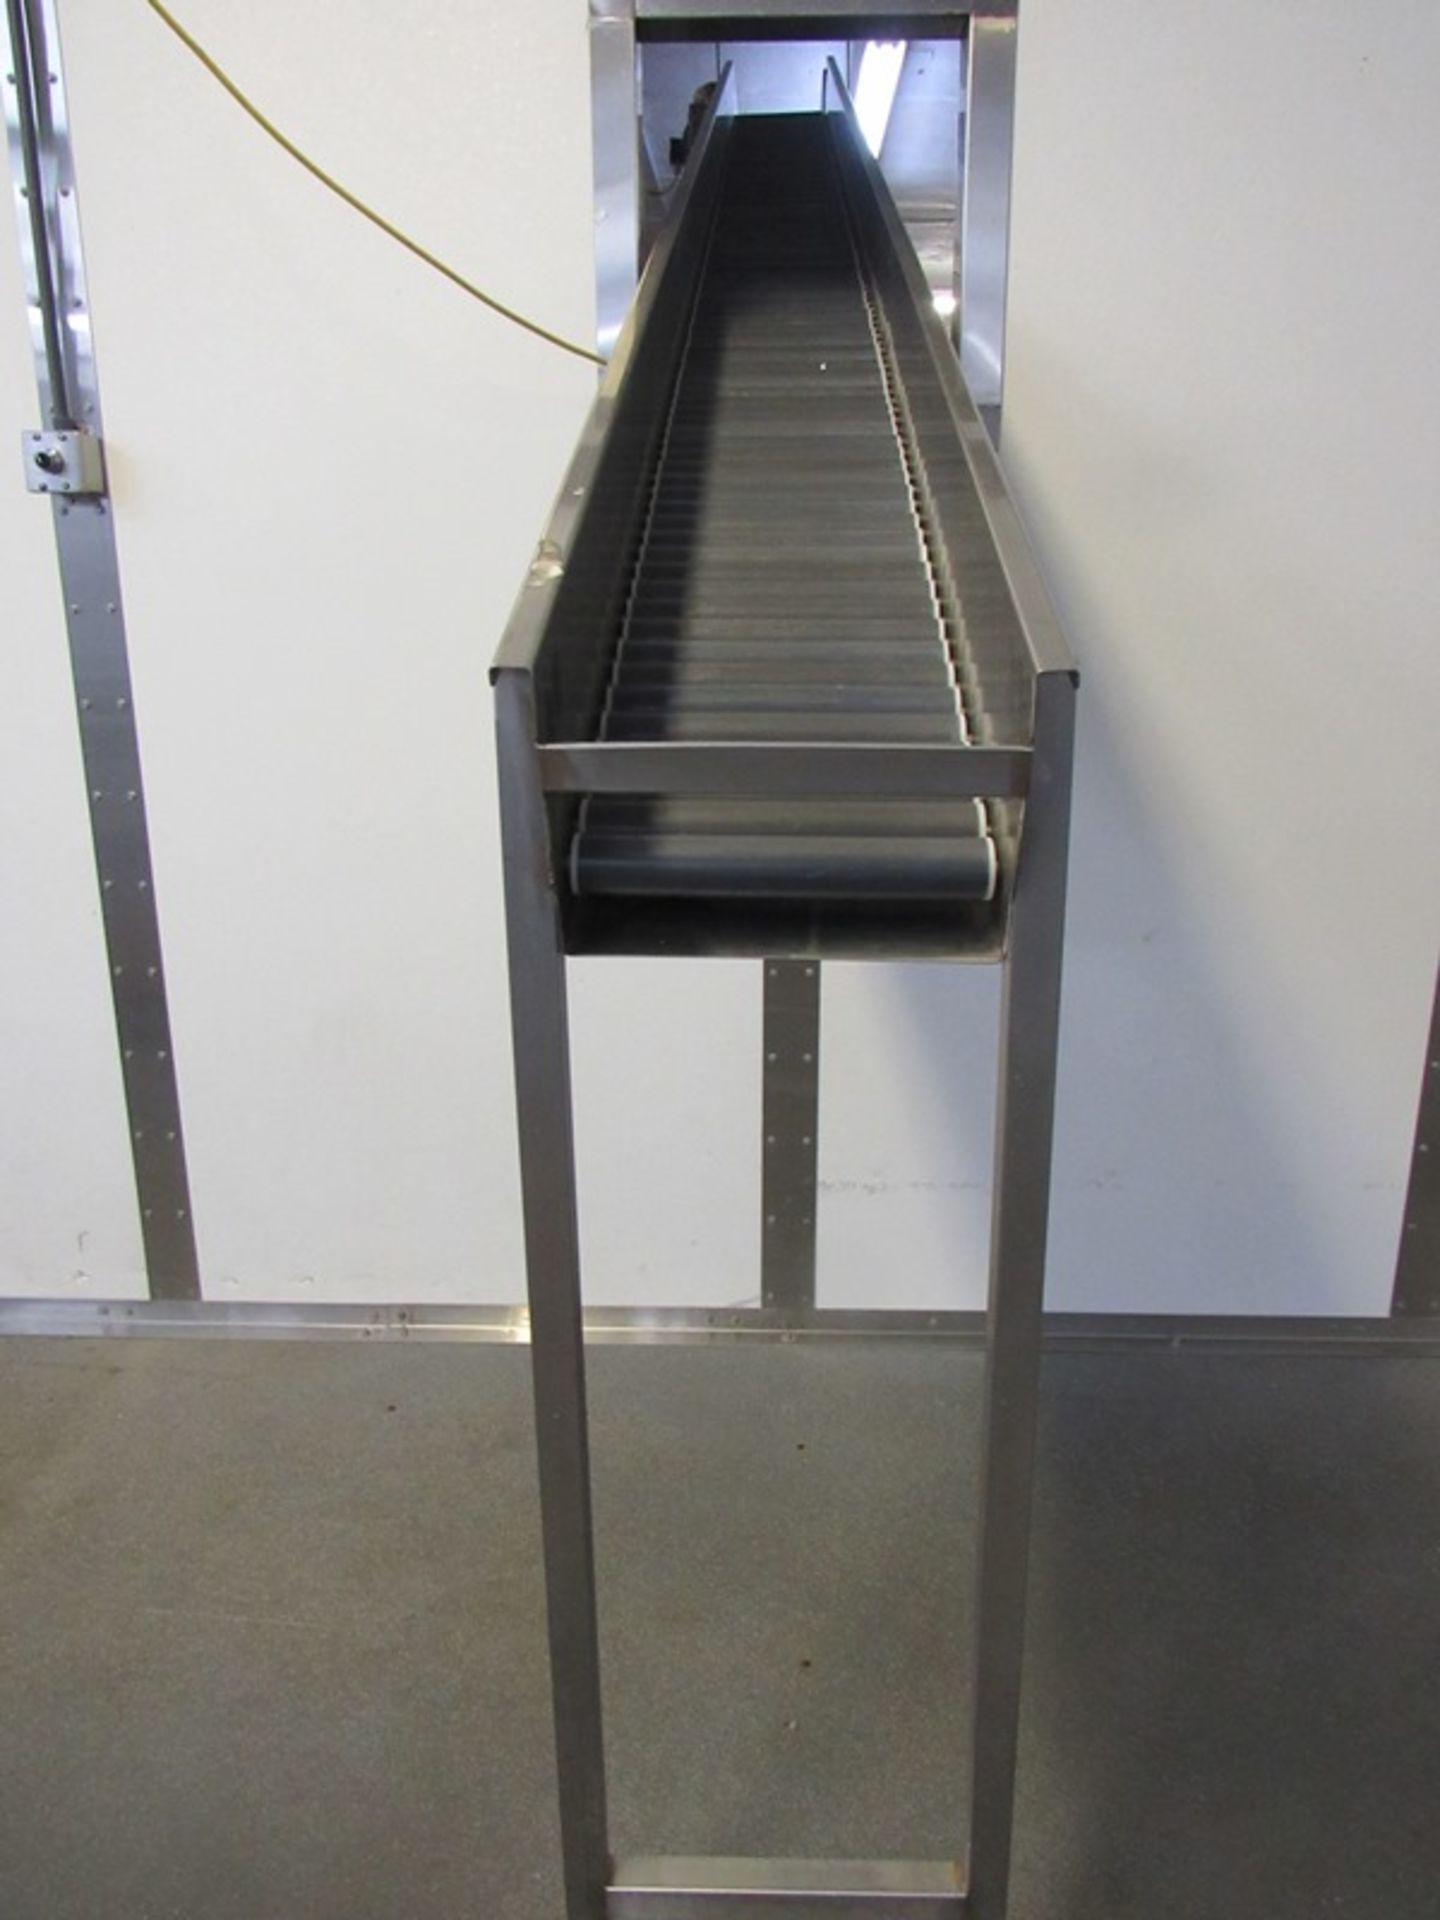 Stainless Steel Ceiling Suspend Conveyor, 12" W X 90' L, 1 h.p. motor, incline/decline (Required - Image 10 of 10